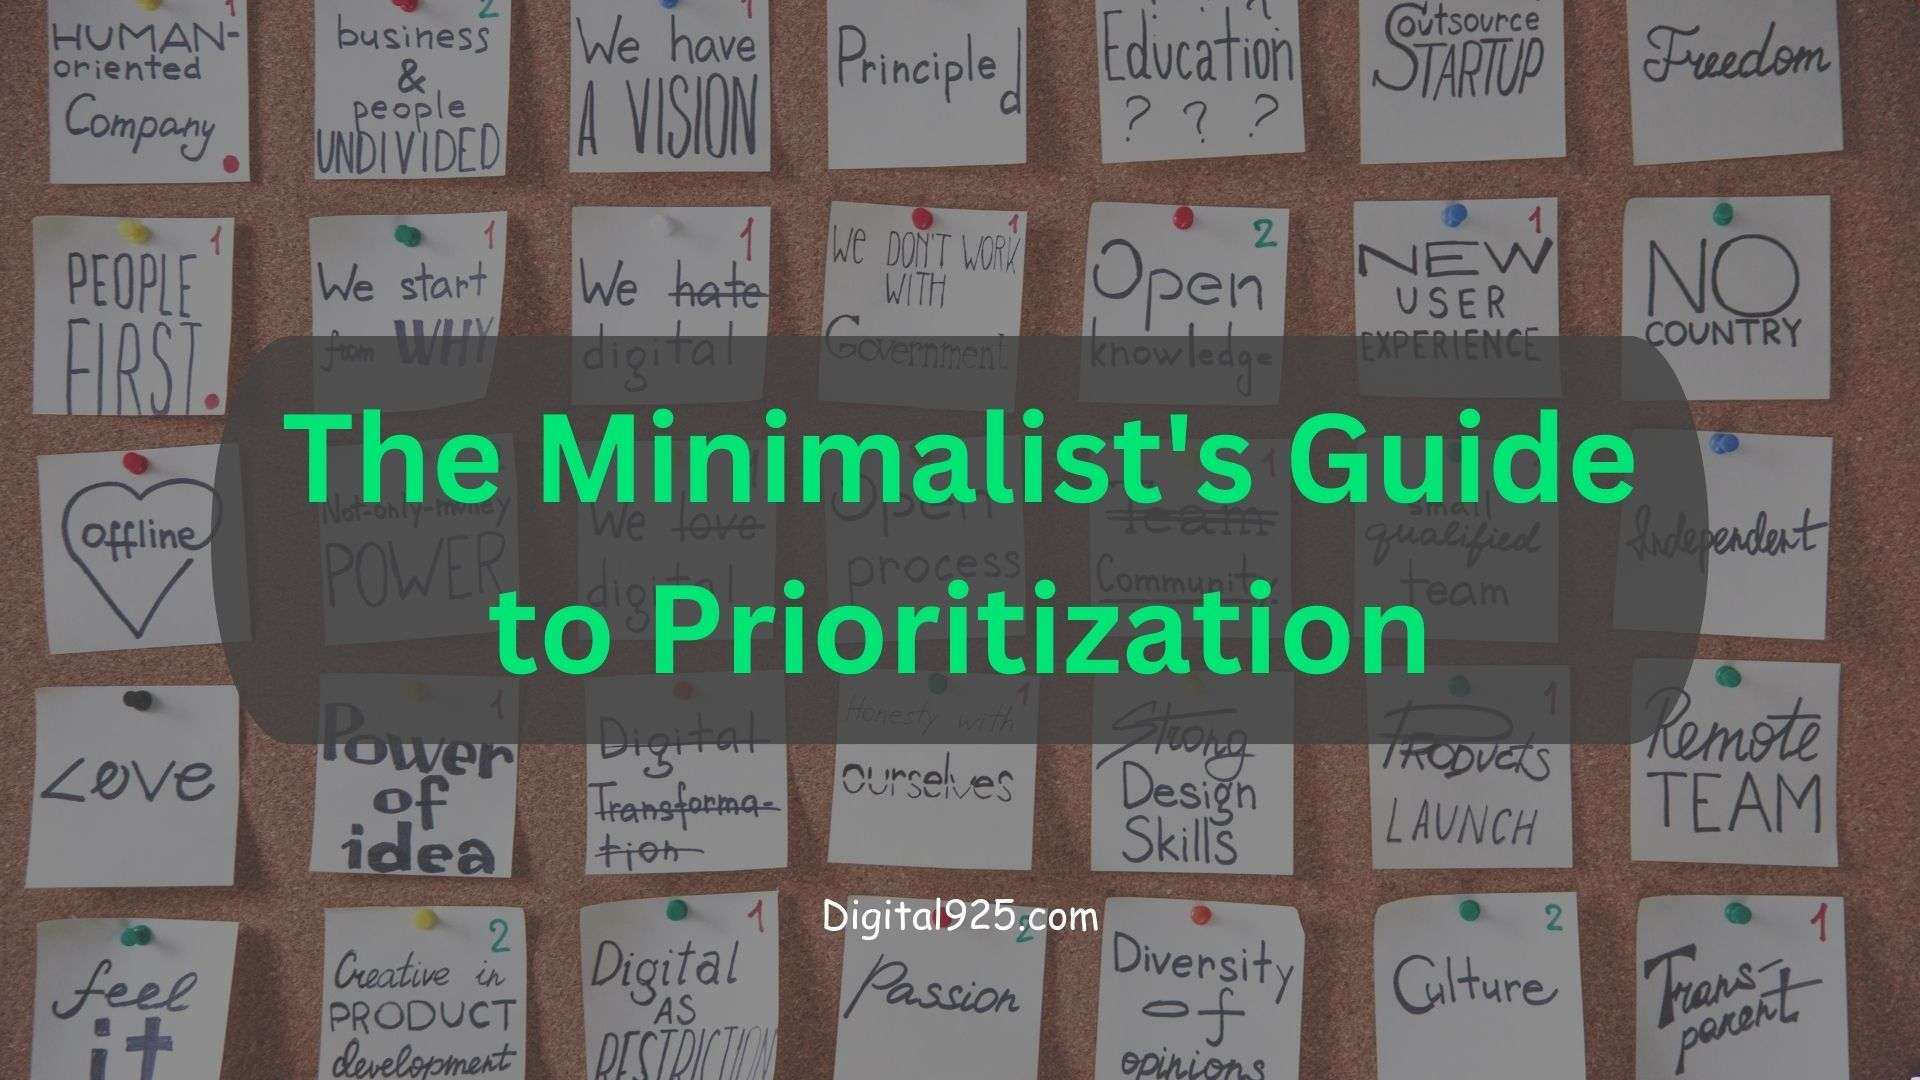 The Minimalist’s Guide to Prioritization